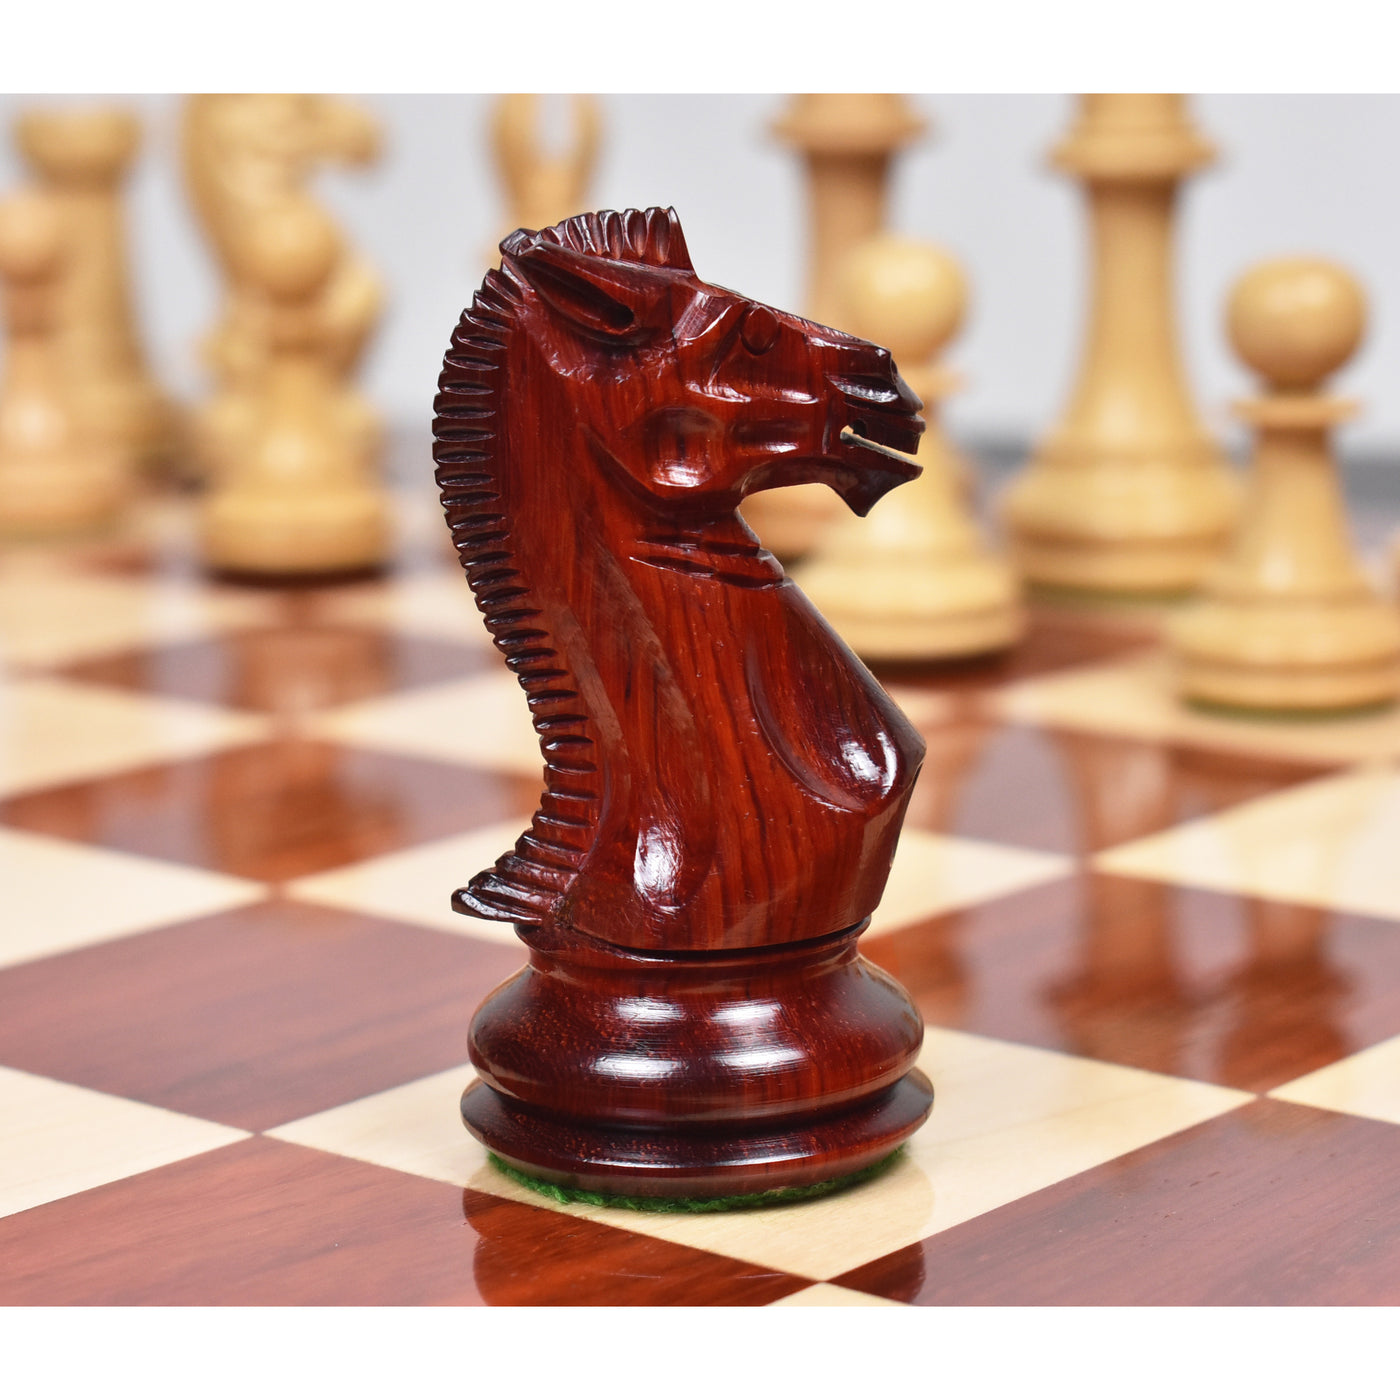 4.1″ Traveller Staunton Luxury Chess Pieces Only set – Bud Rose Wood & Boxwood